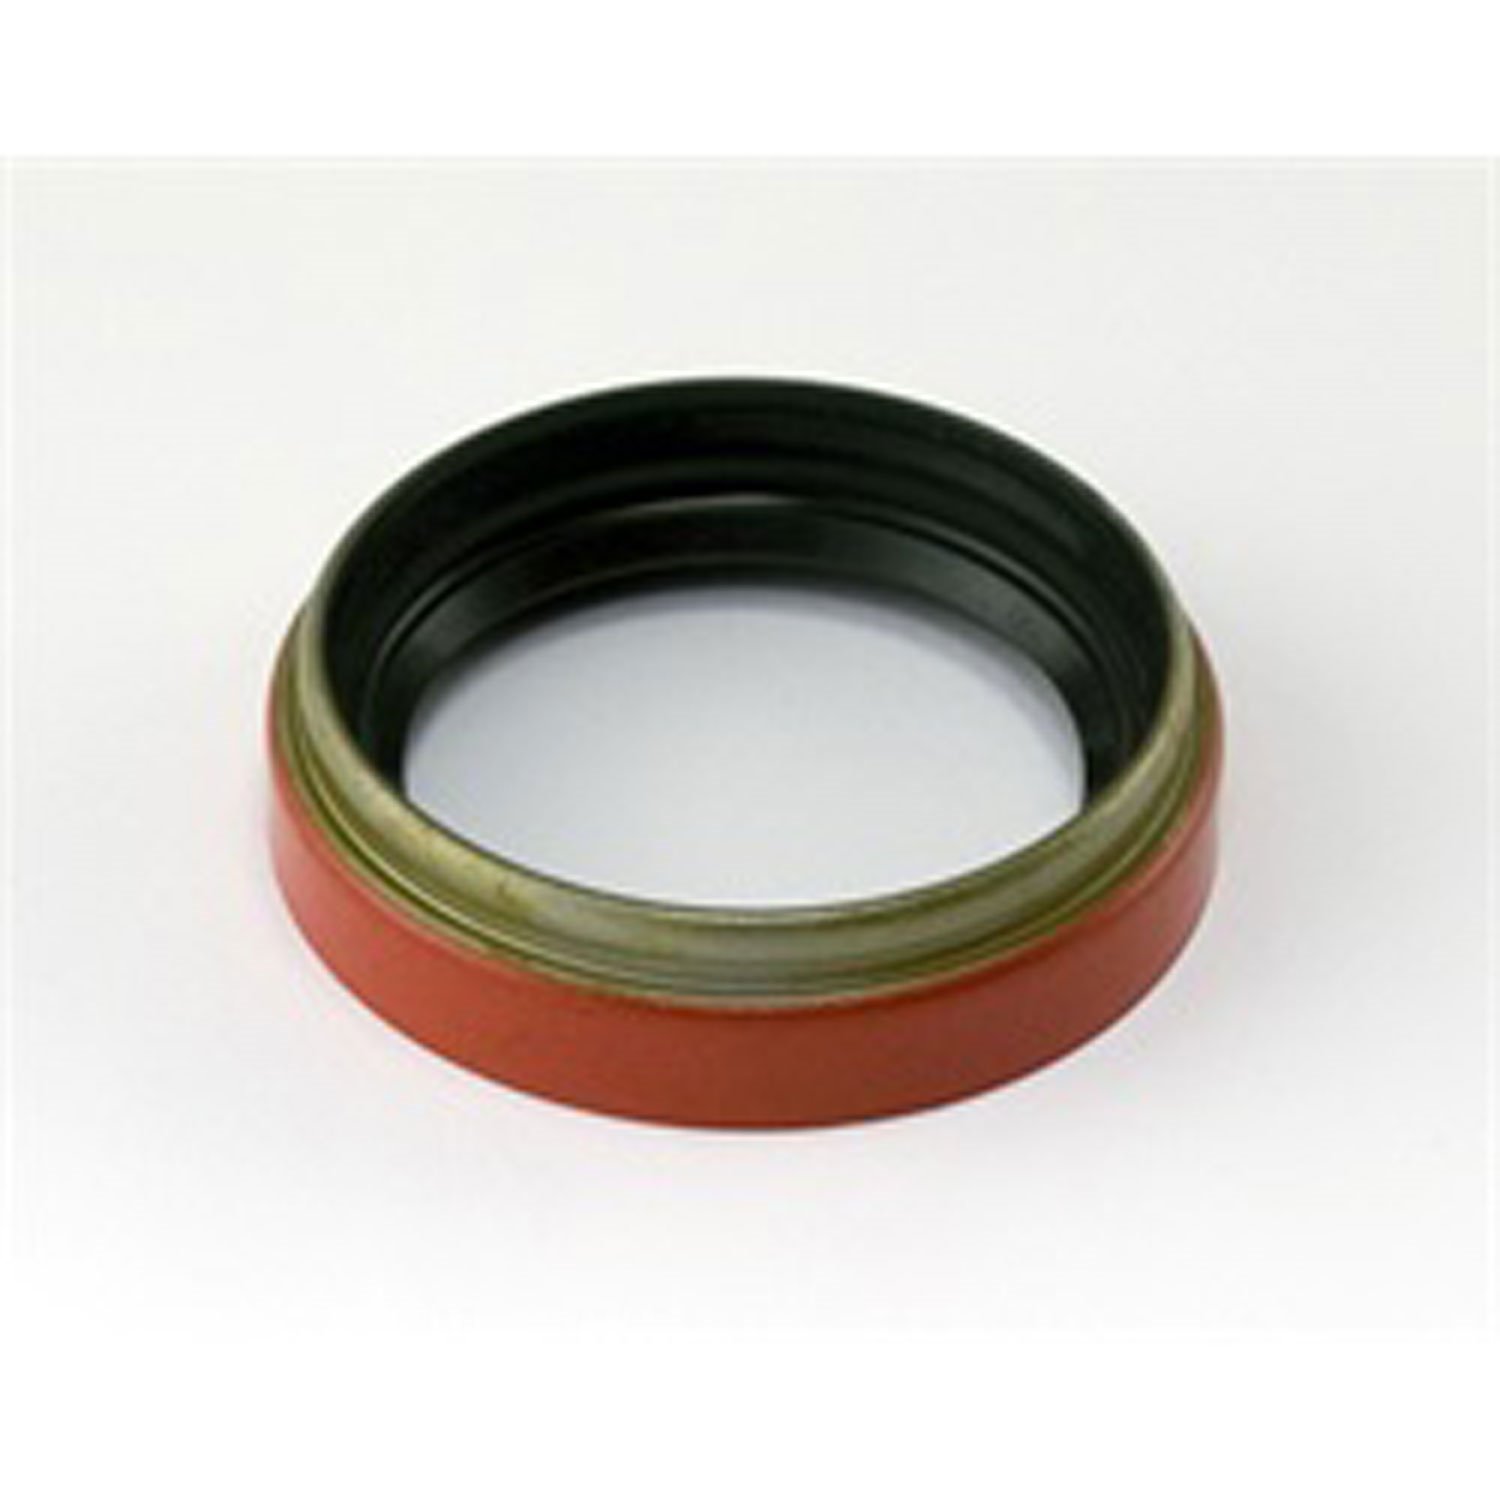 Replacement inner axle oil seal, Fits right side of 84-91 Jeep Cherokees and 87-95 Wrangler